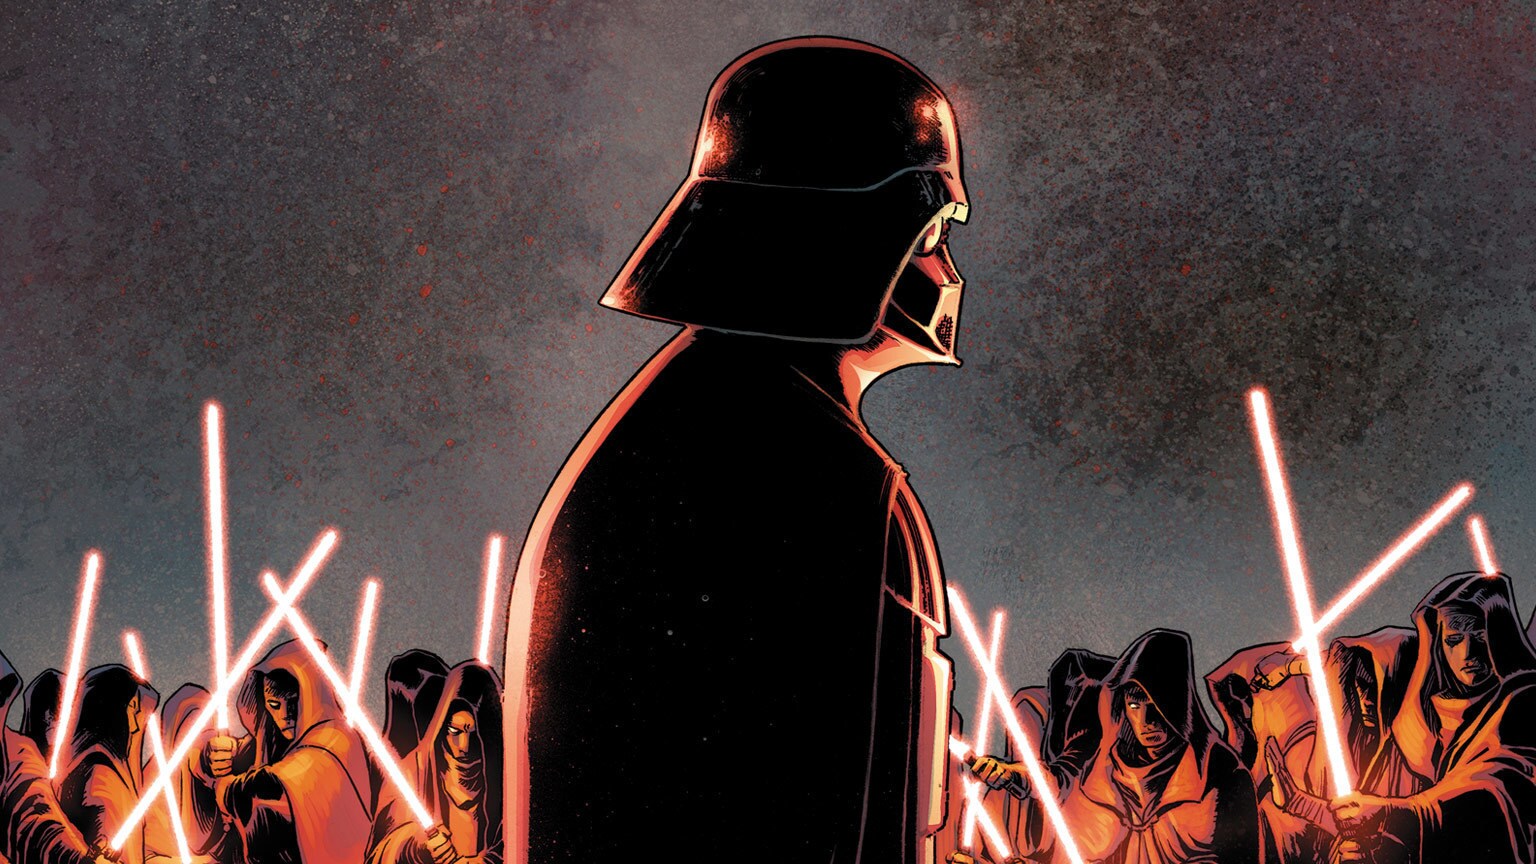 Vader Confronts His Master in Marvel’s Star Wars: Darth Vader #11 - Exclusive Preview